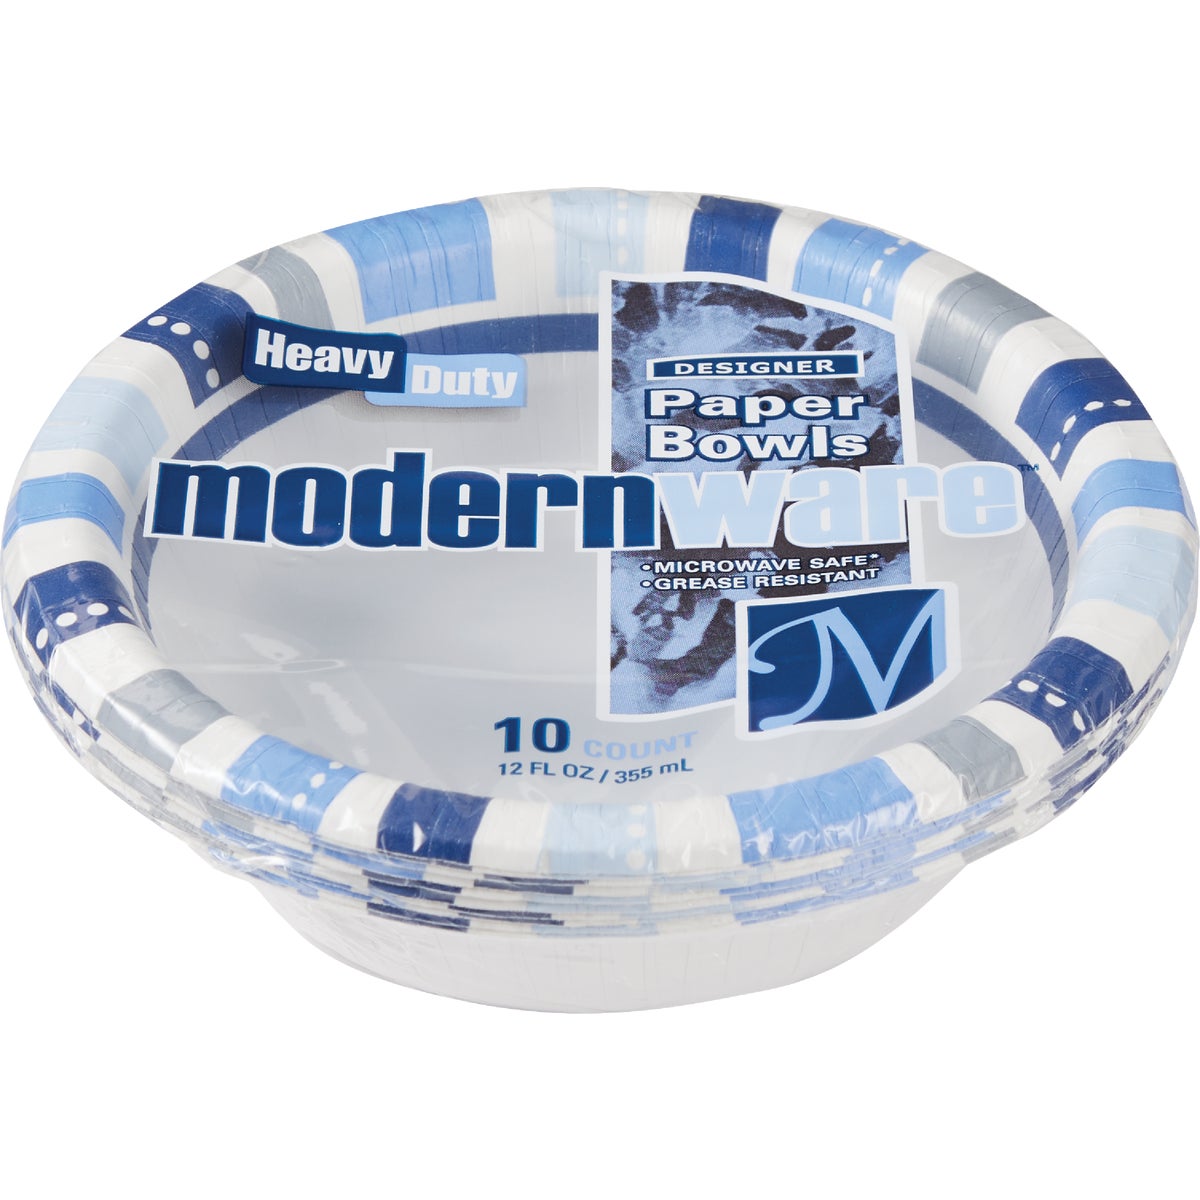 Item 631203, ModernWare collection. Perfect for picnics, holidays, and everyday use.